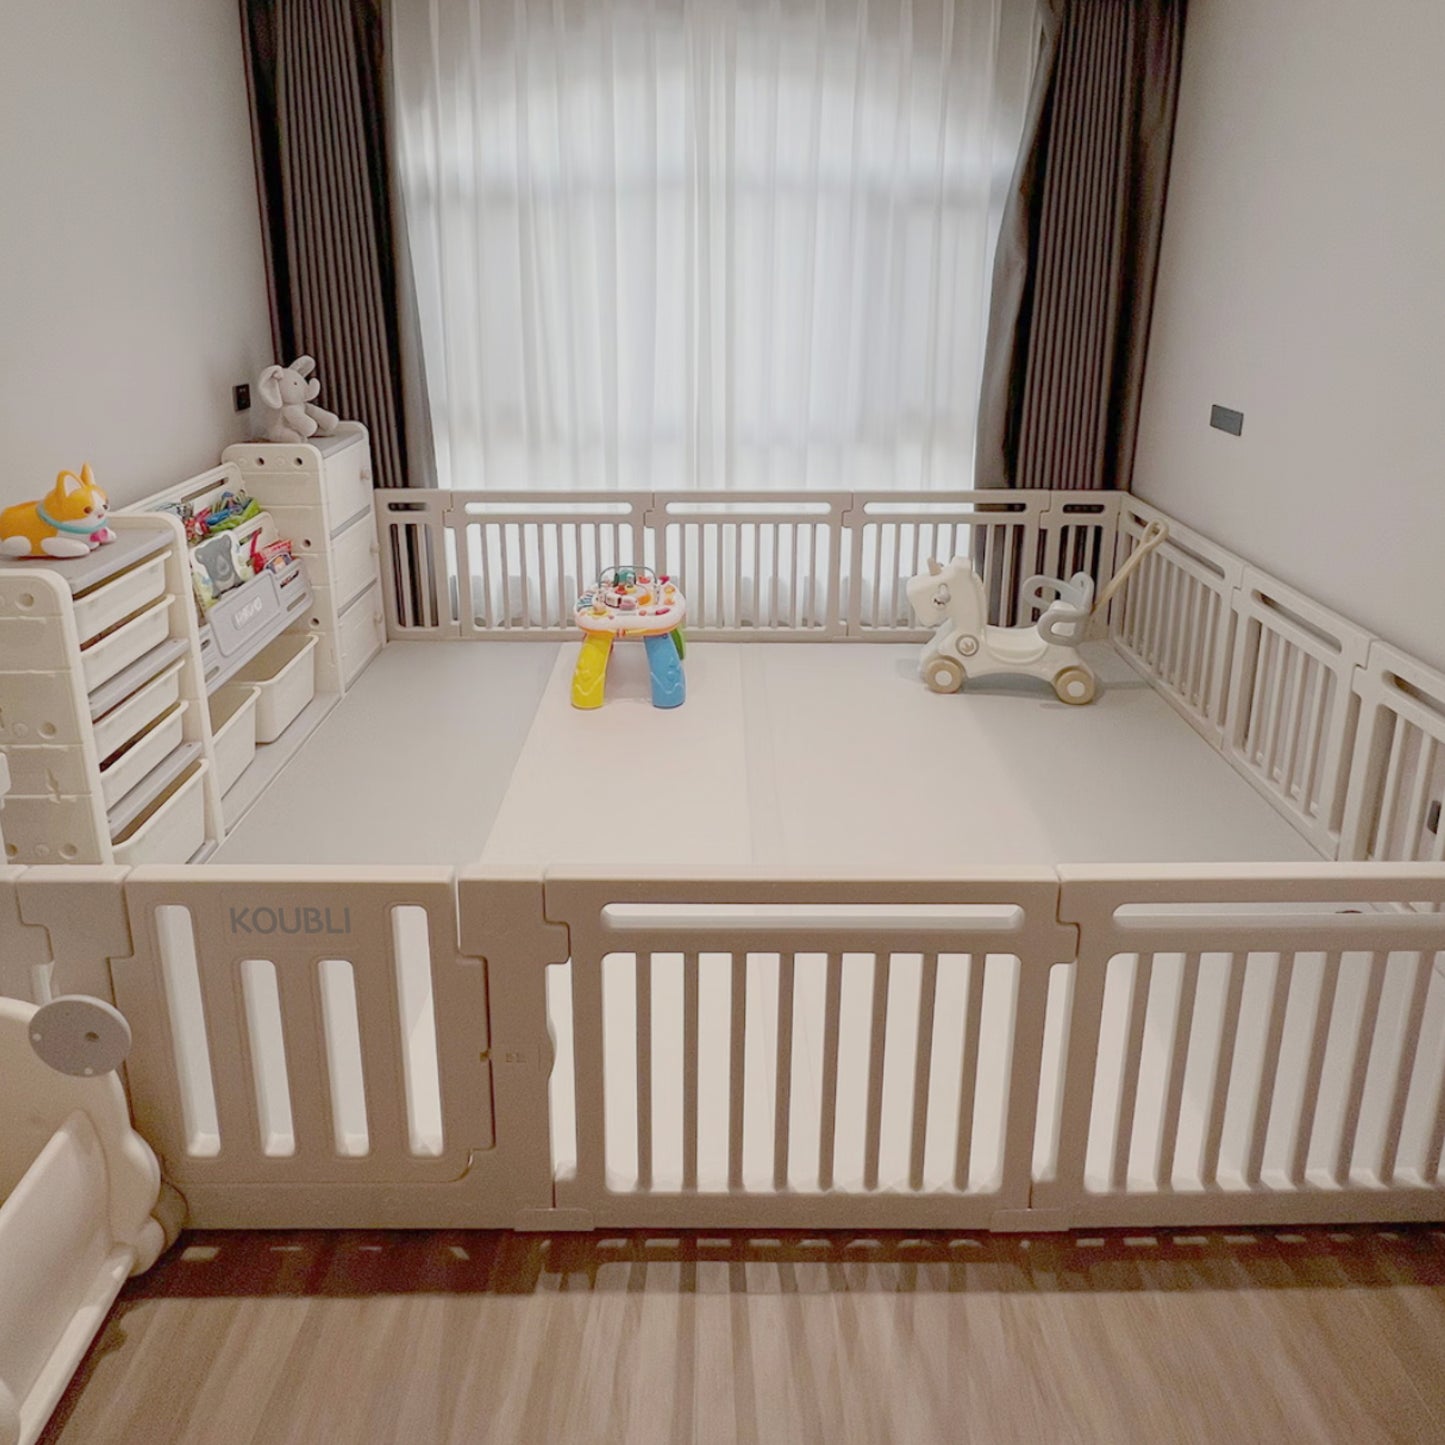 KOUBLI Baby Playpen, Safety Baby Gate Playpen for Babies